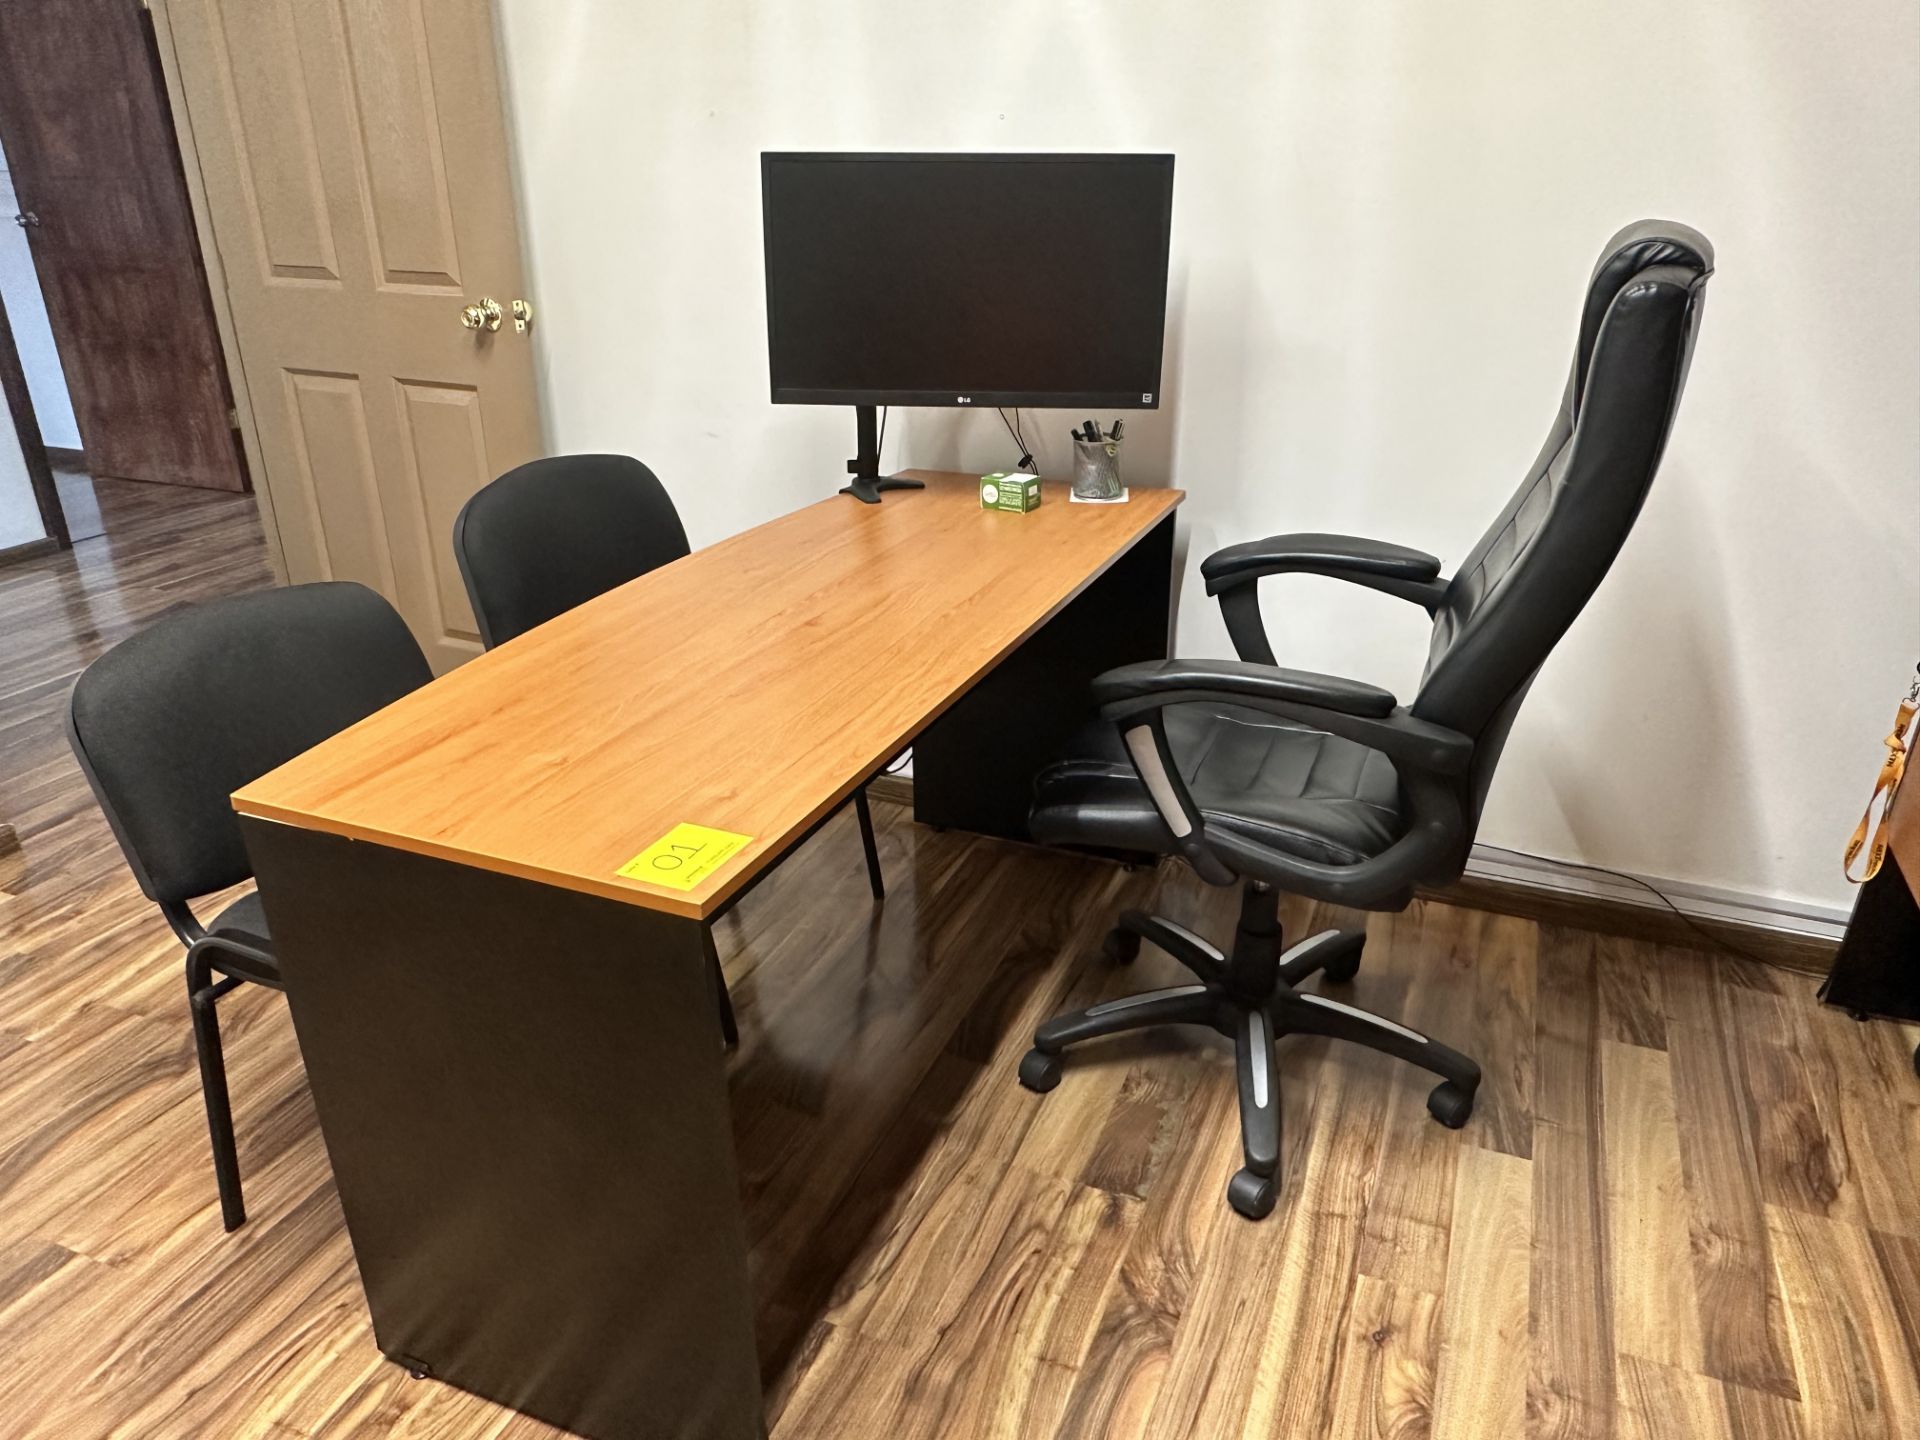 Lot of office furniture includes: 1 Desk in brown wood measures approximately 1.50 x 0.60 x 0.75 m; - Image 8 of 18